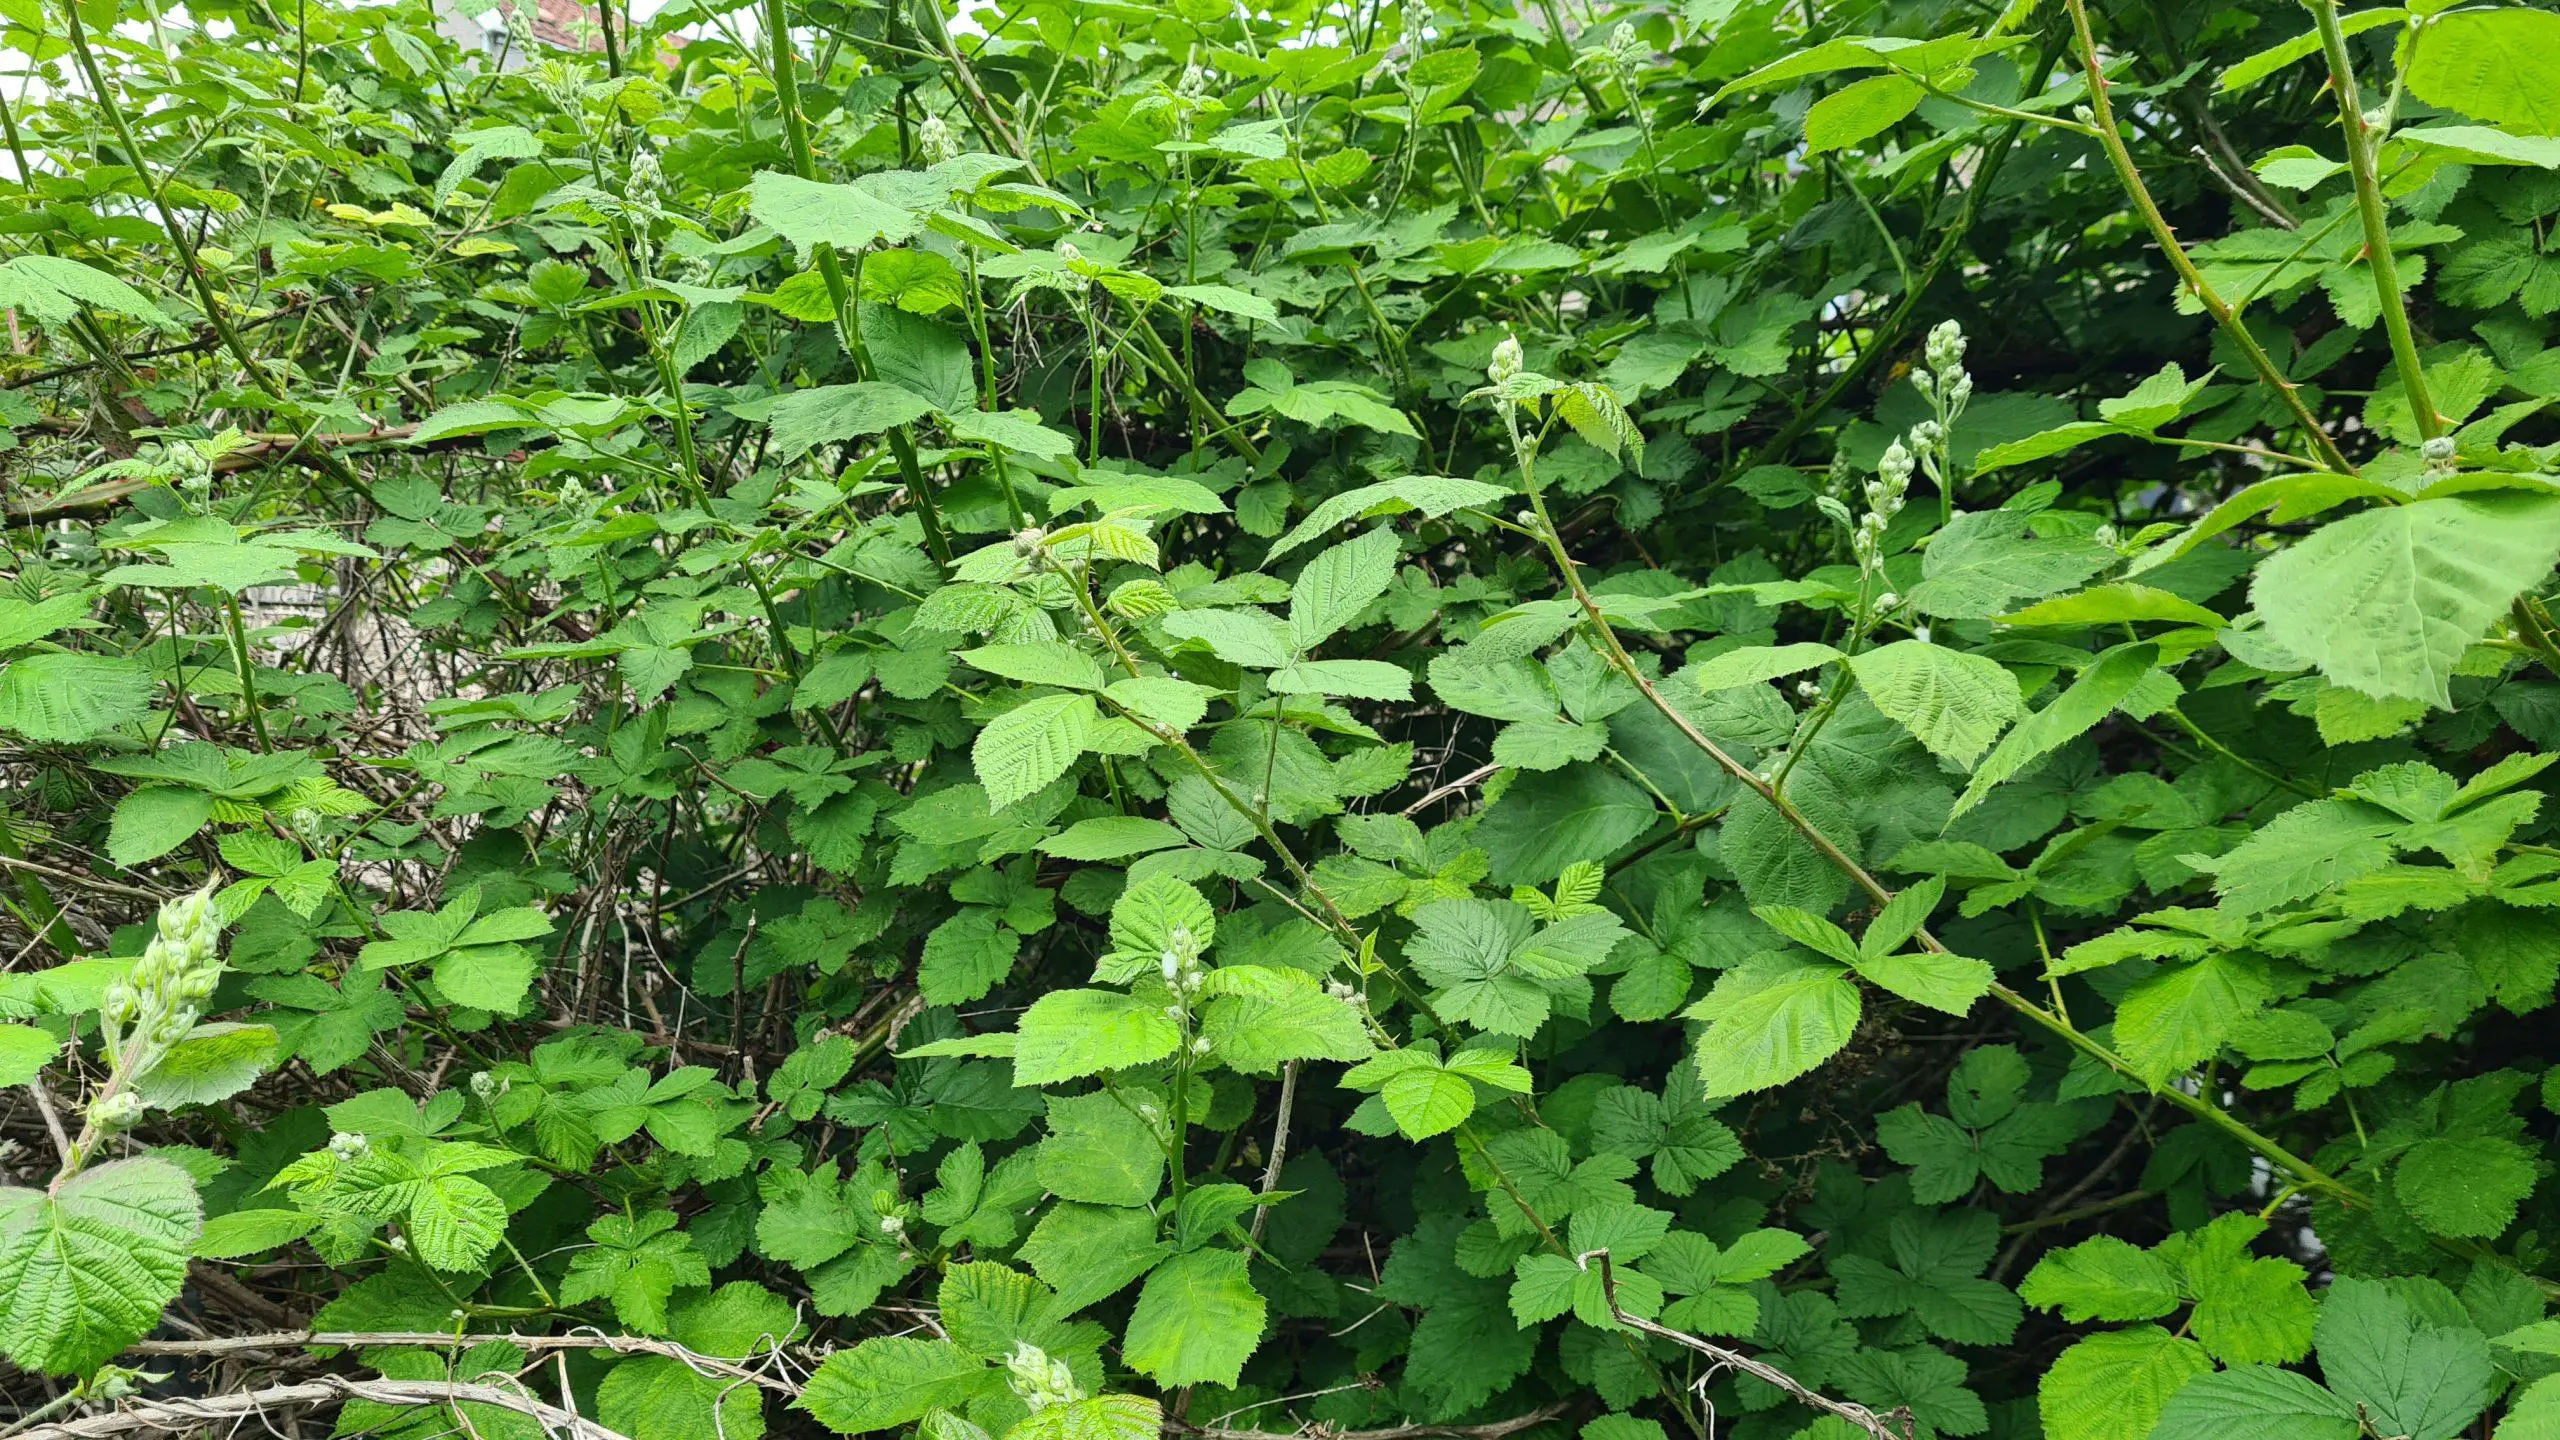 Brambles thriving in a garden and out competing native plants